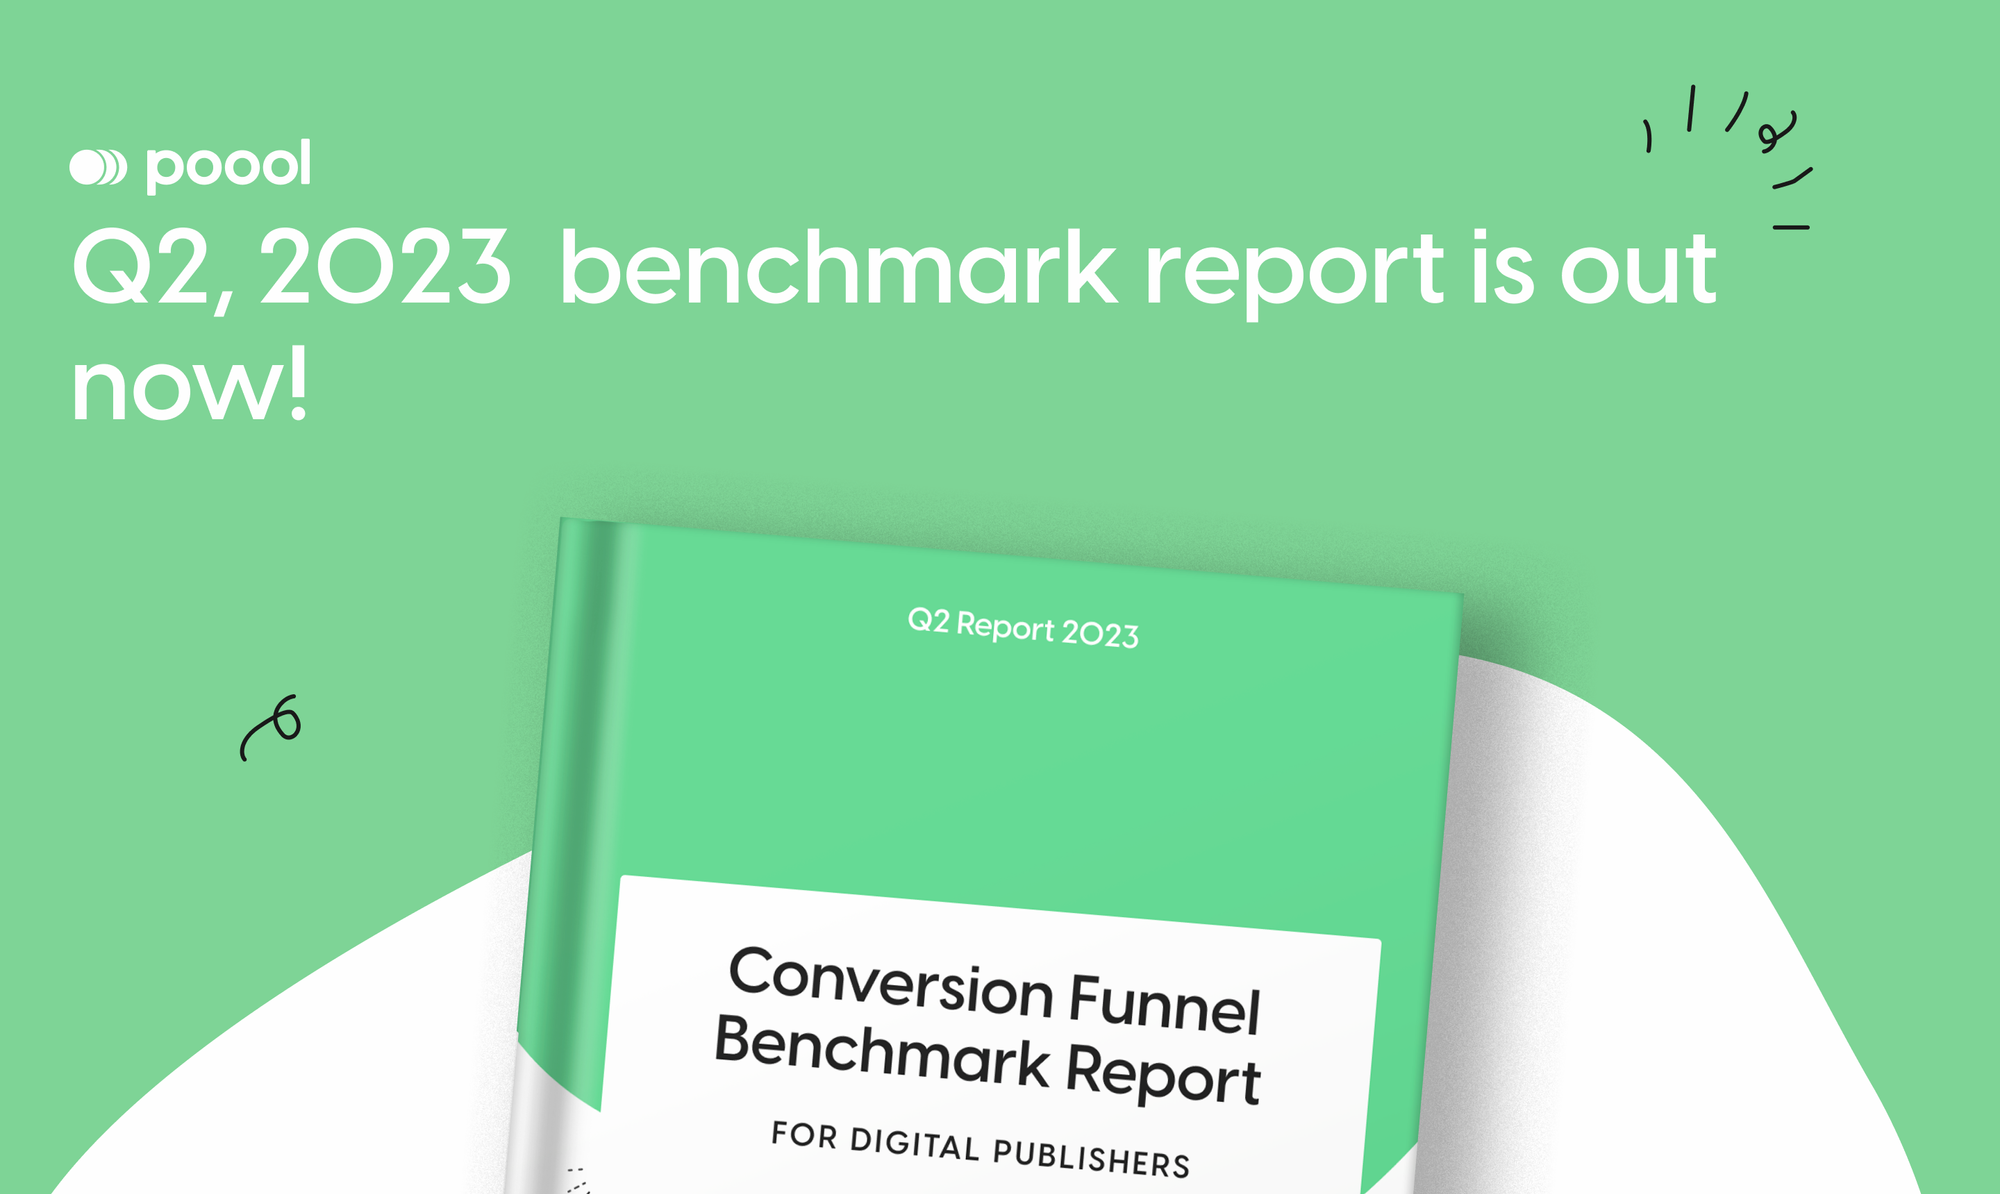 The Conversion Funnel Benchmark Report Q2 2023 is live